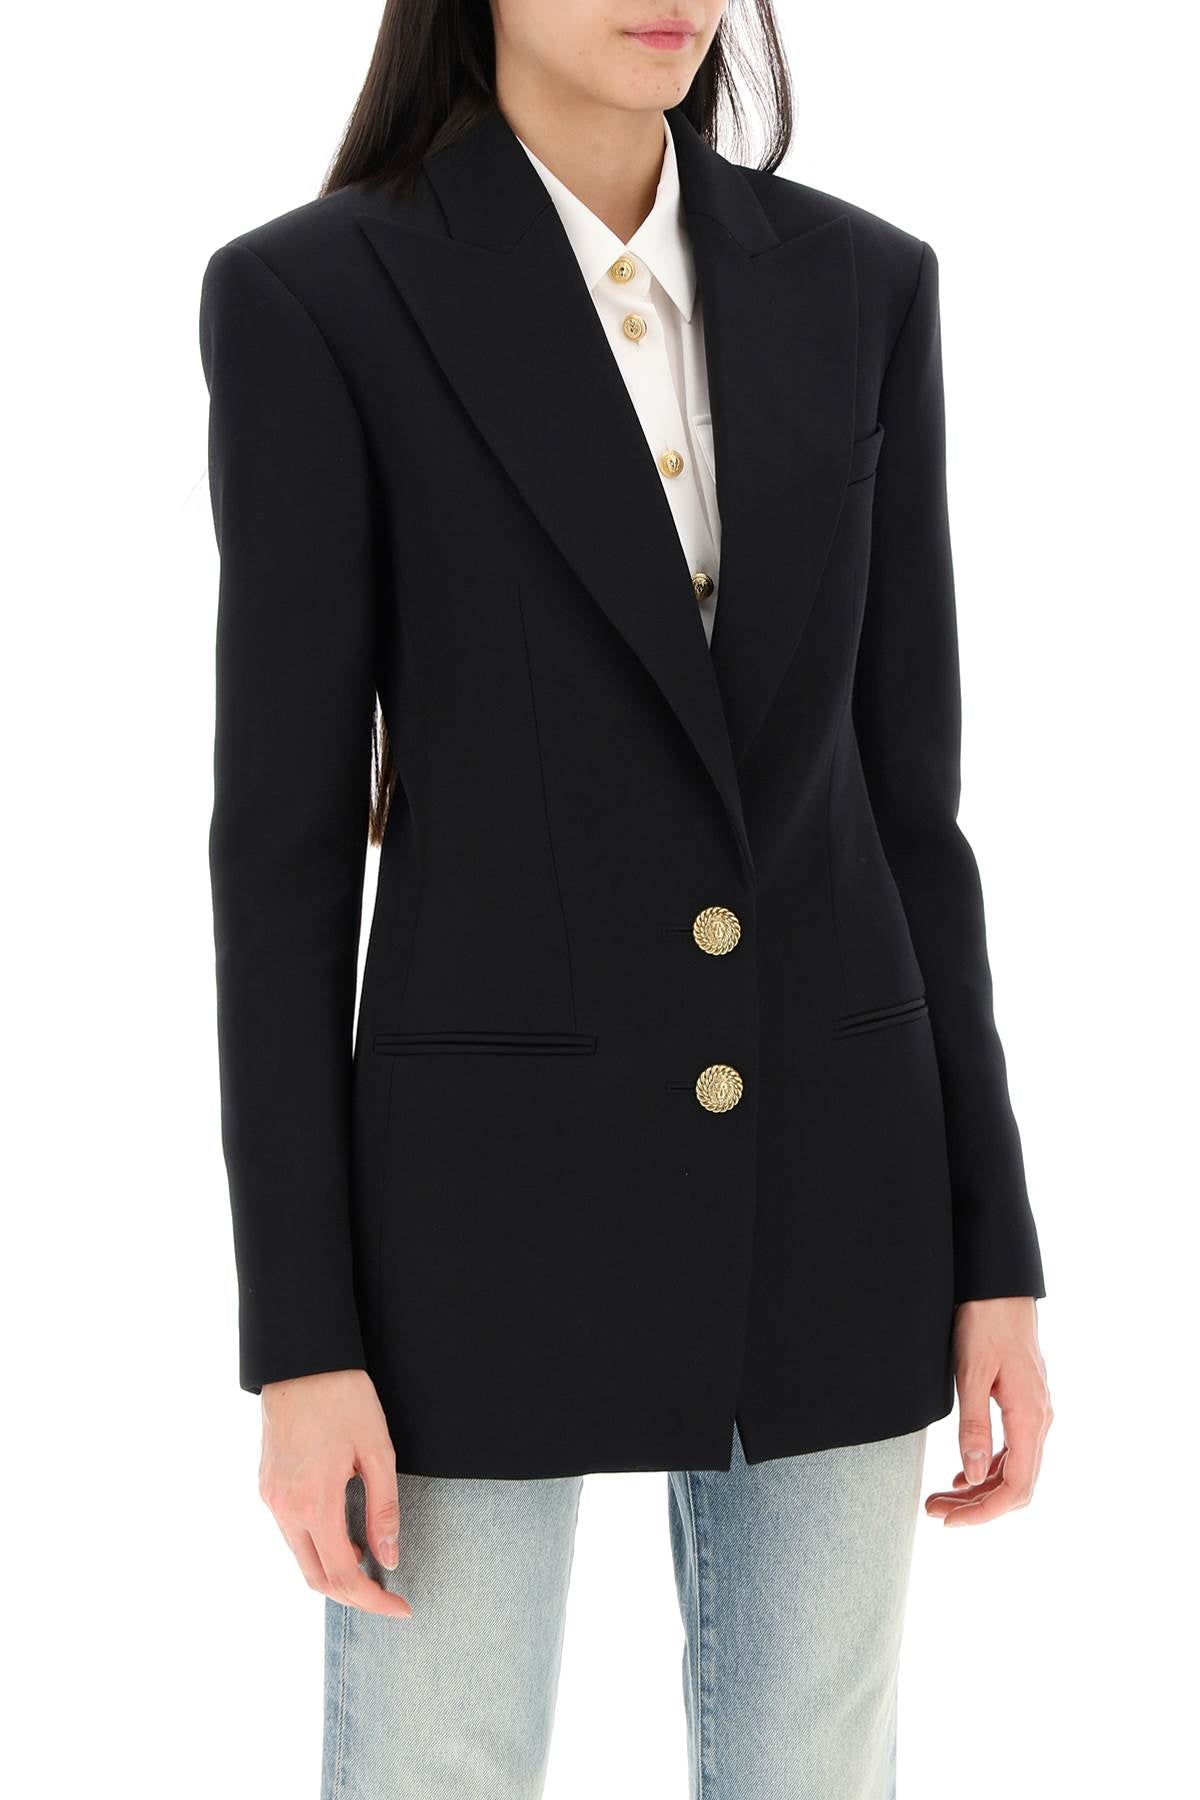 BALMAIN Black Virgin Wool Single-Breasted Jacket with Gold-Tone Lion Buttons for Women